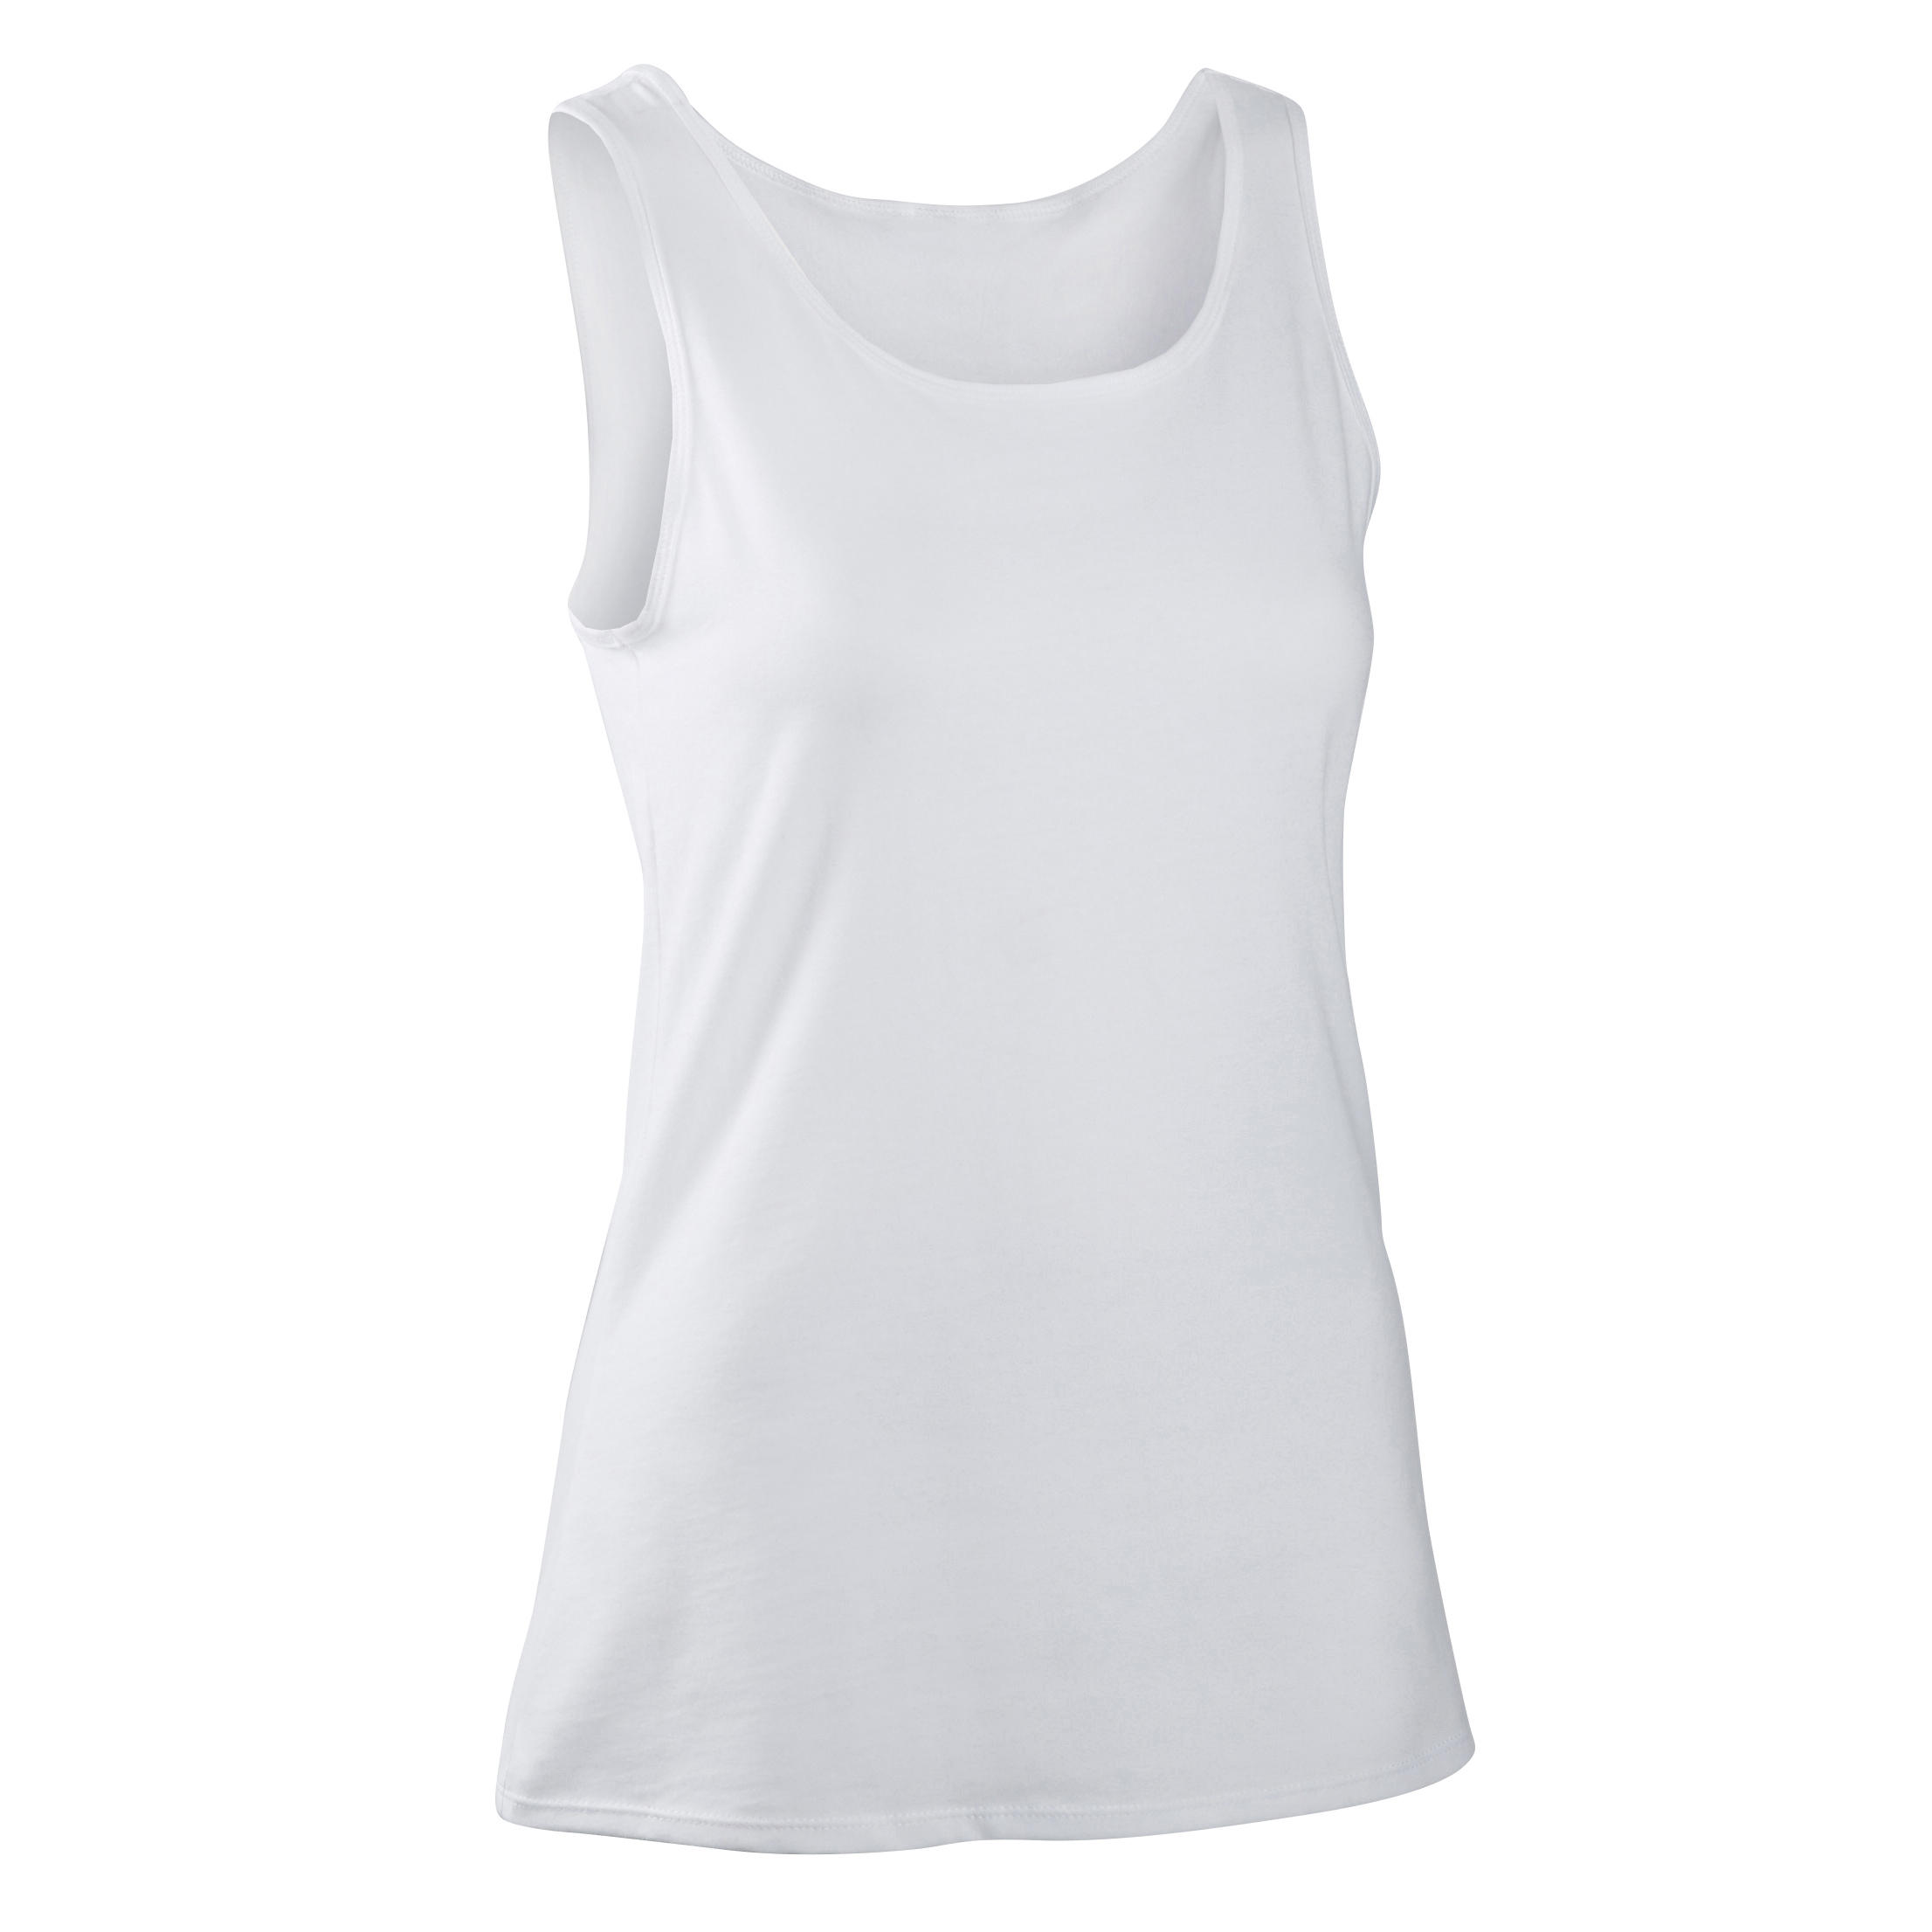 Women's Straight-Cut Crew Neck Cotton Fitness Tank Top 100 - Icy White 7/7